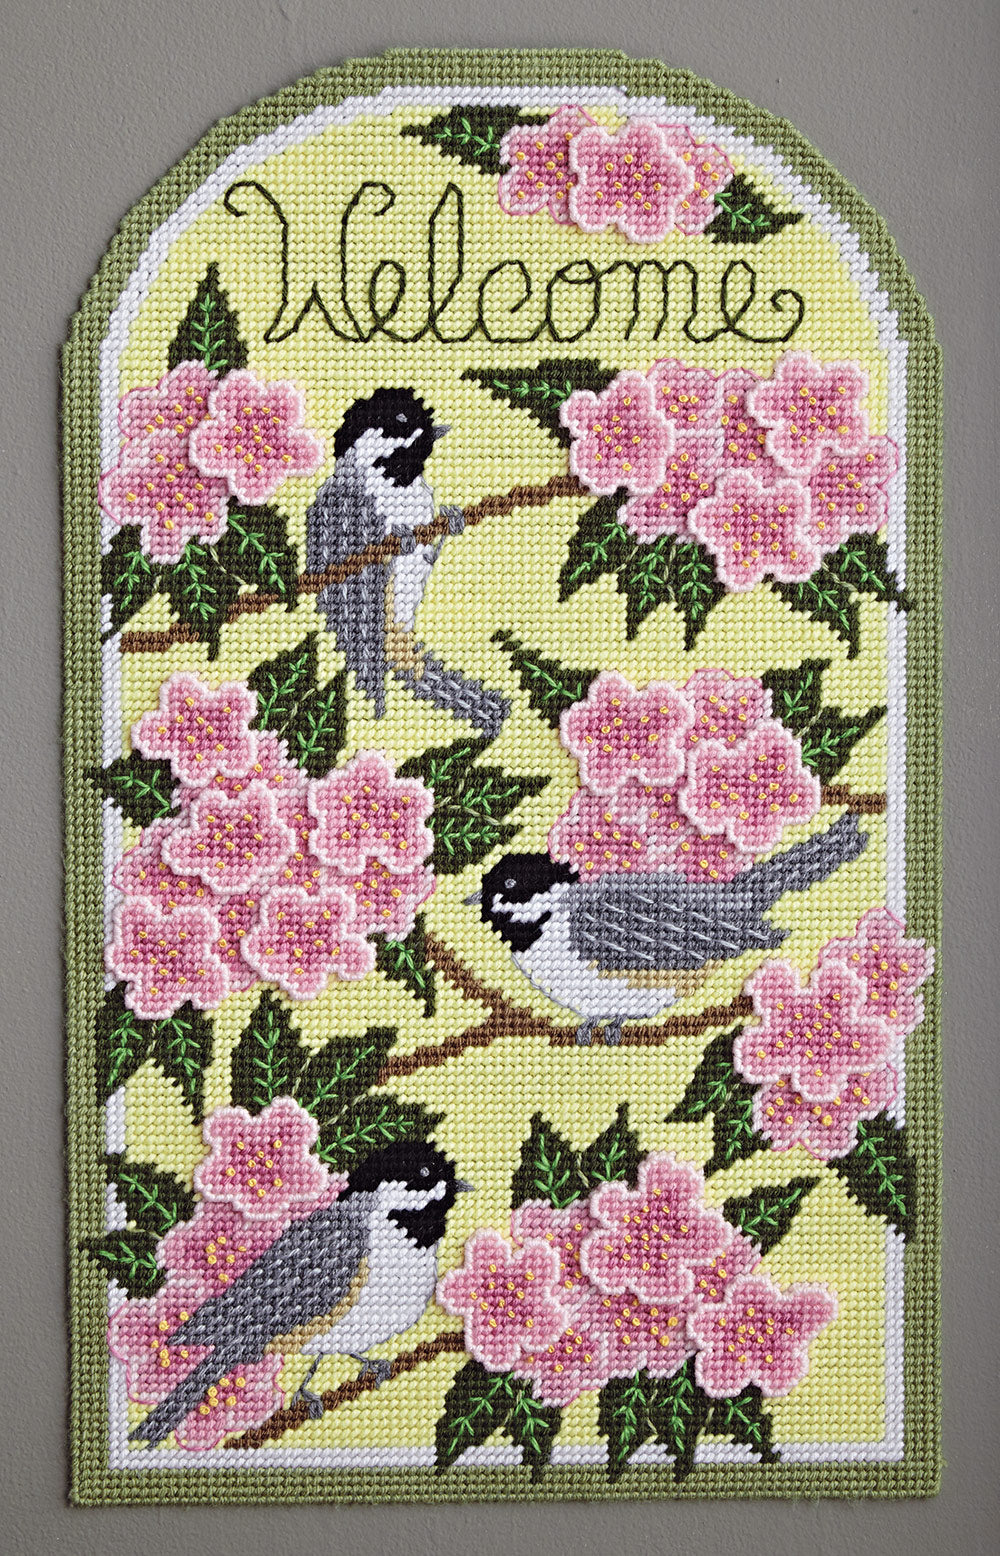 Chickadee Welcome Wall Hanging Plastic Canvas Kit